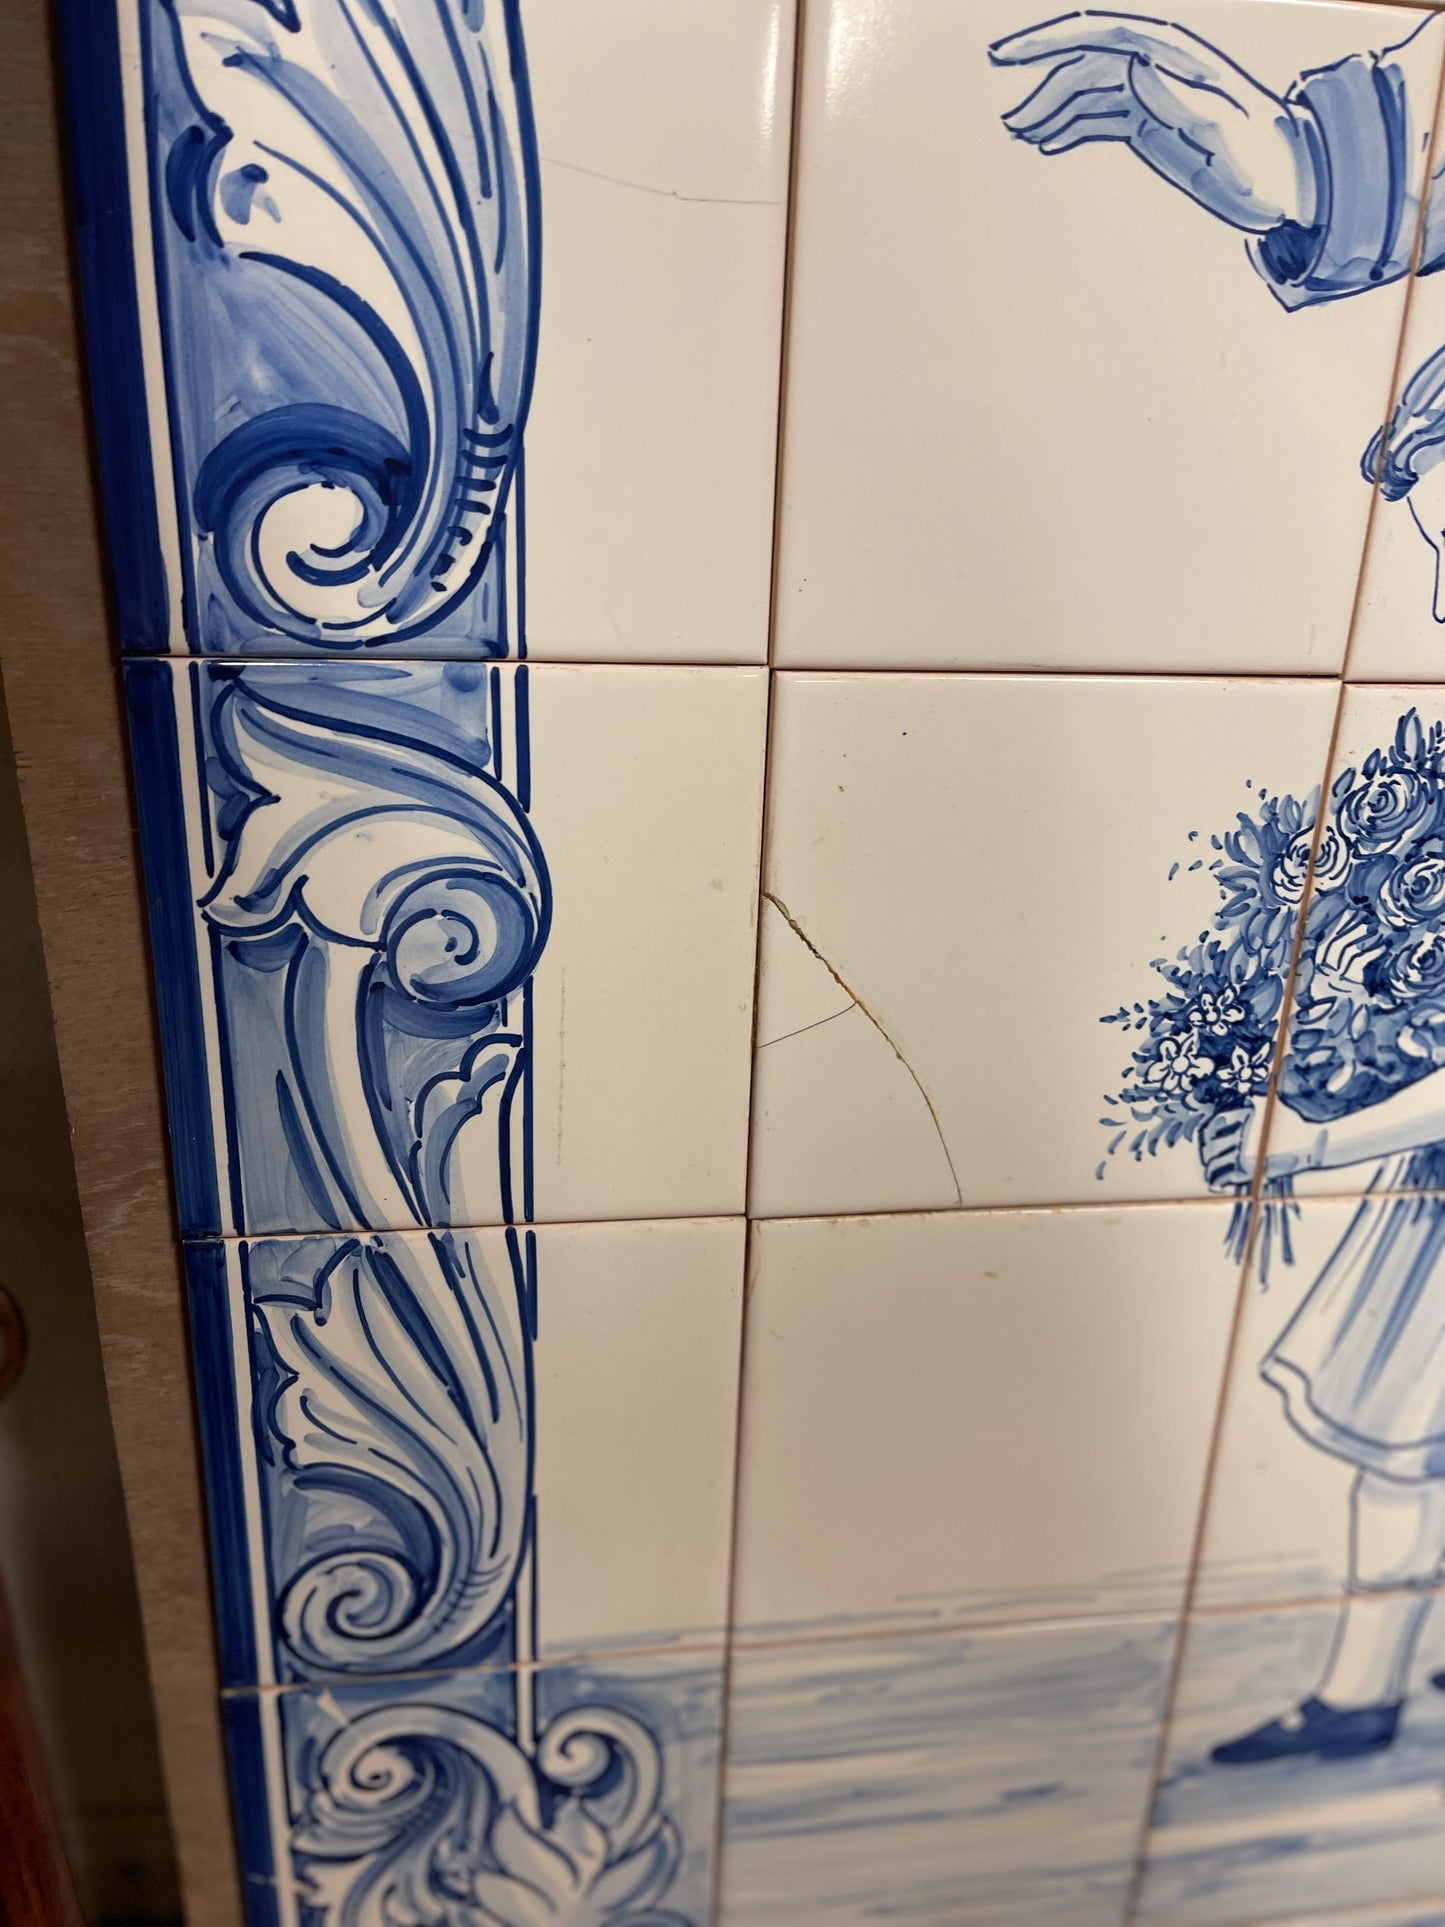 Large Vintage Portuguese Blue and White Tile Mural of a Guardian Angel Watching Over Children